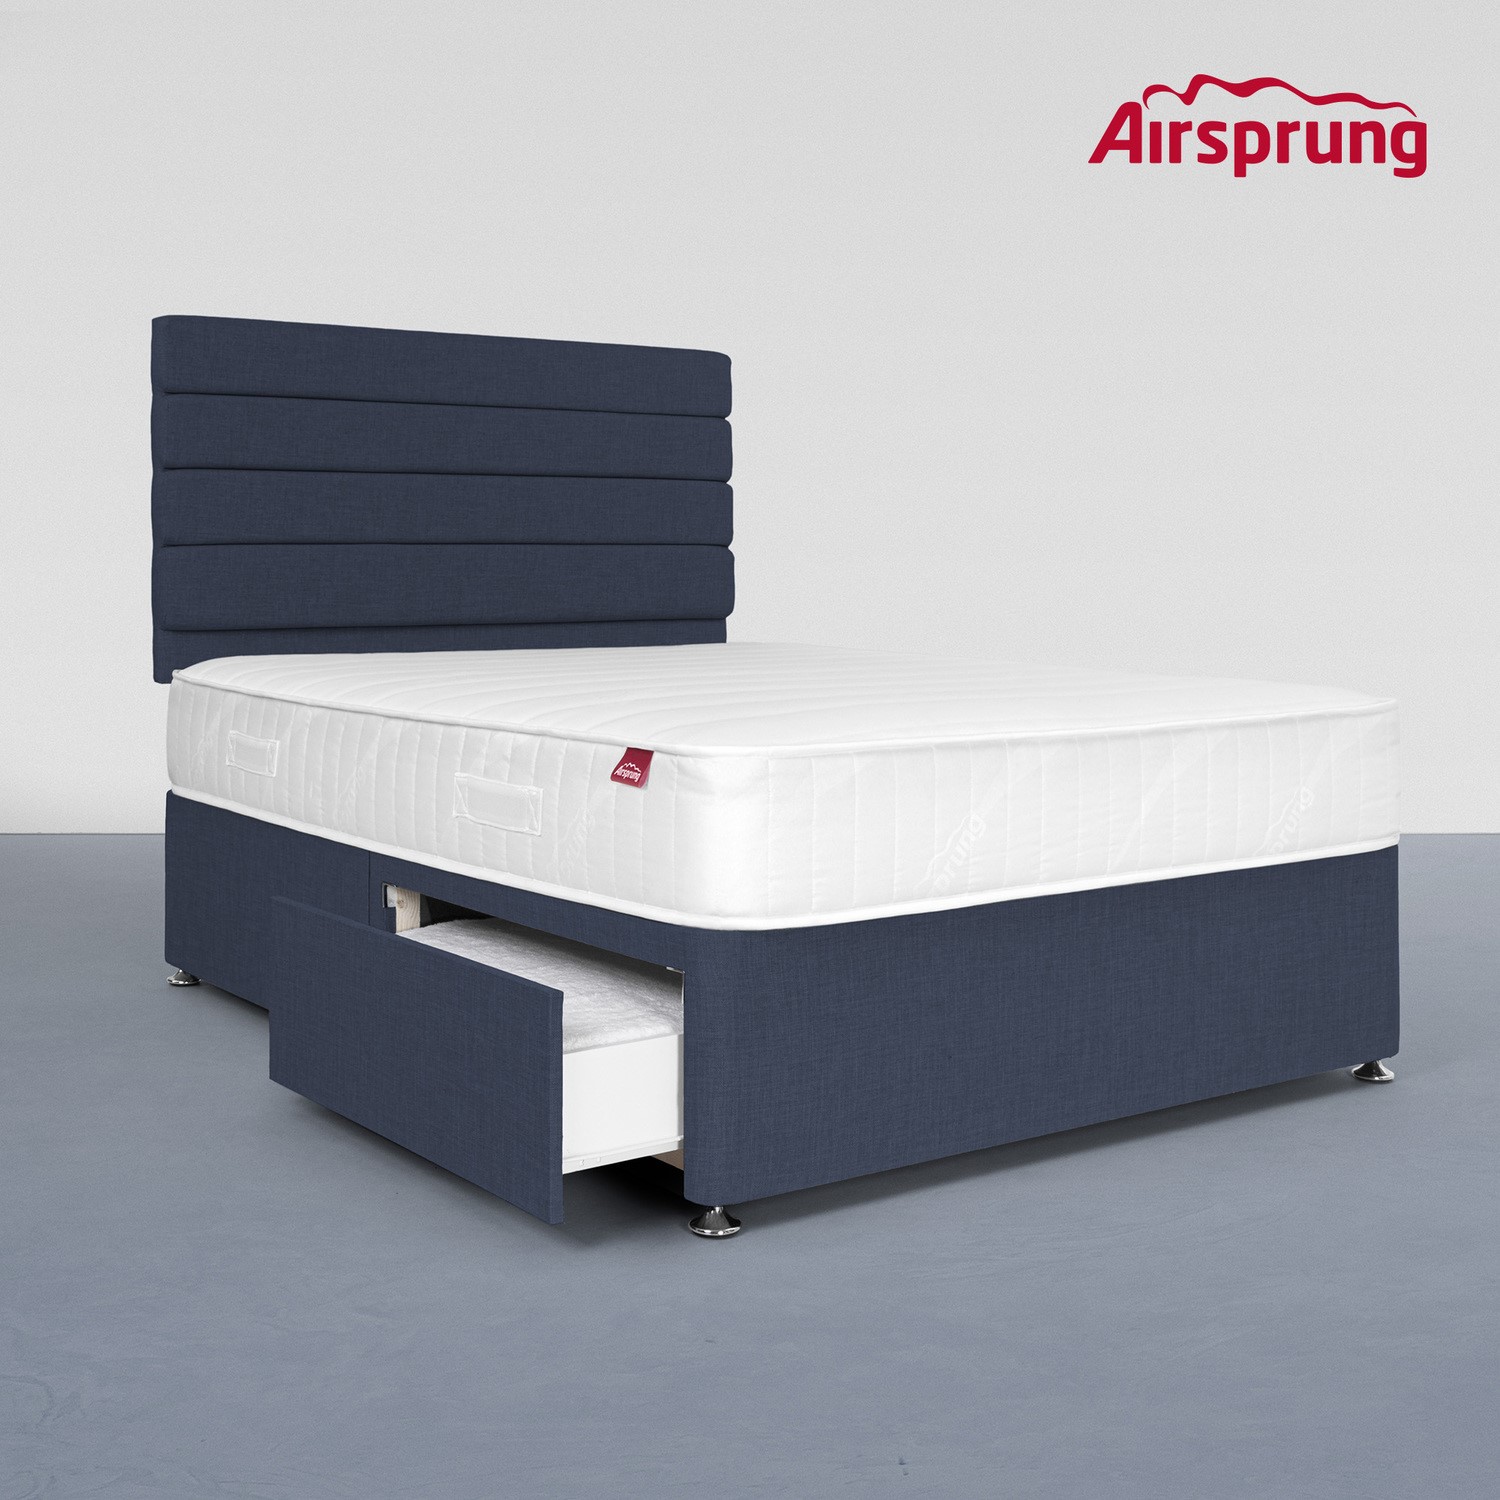 Read more about Airsprung small double 2 drawer divan bed with hybrid mattress midnight blue